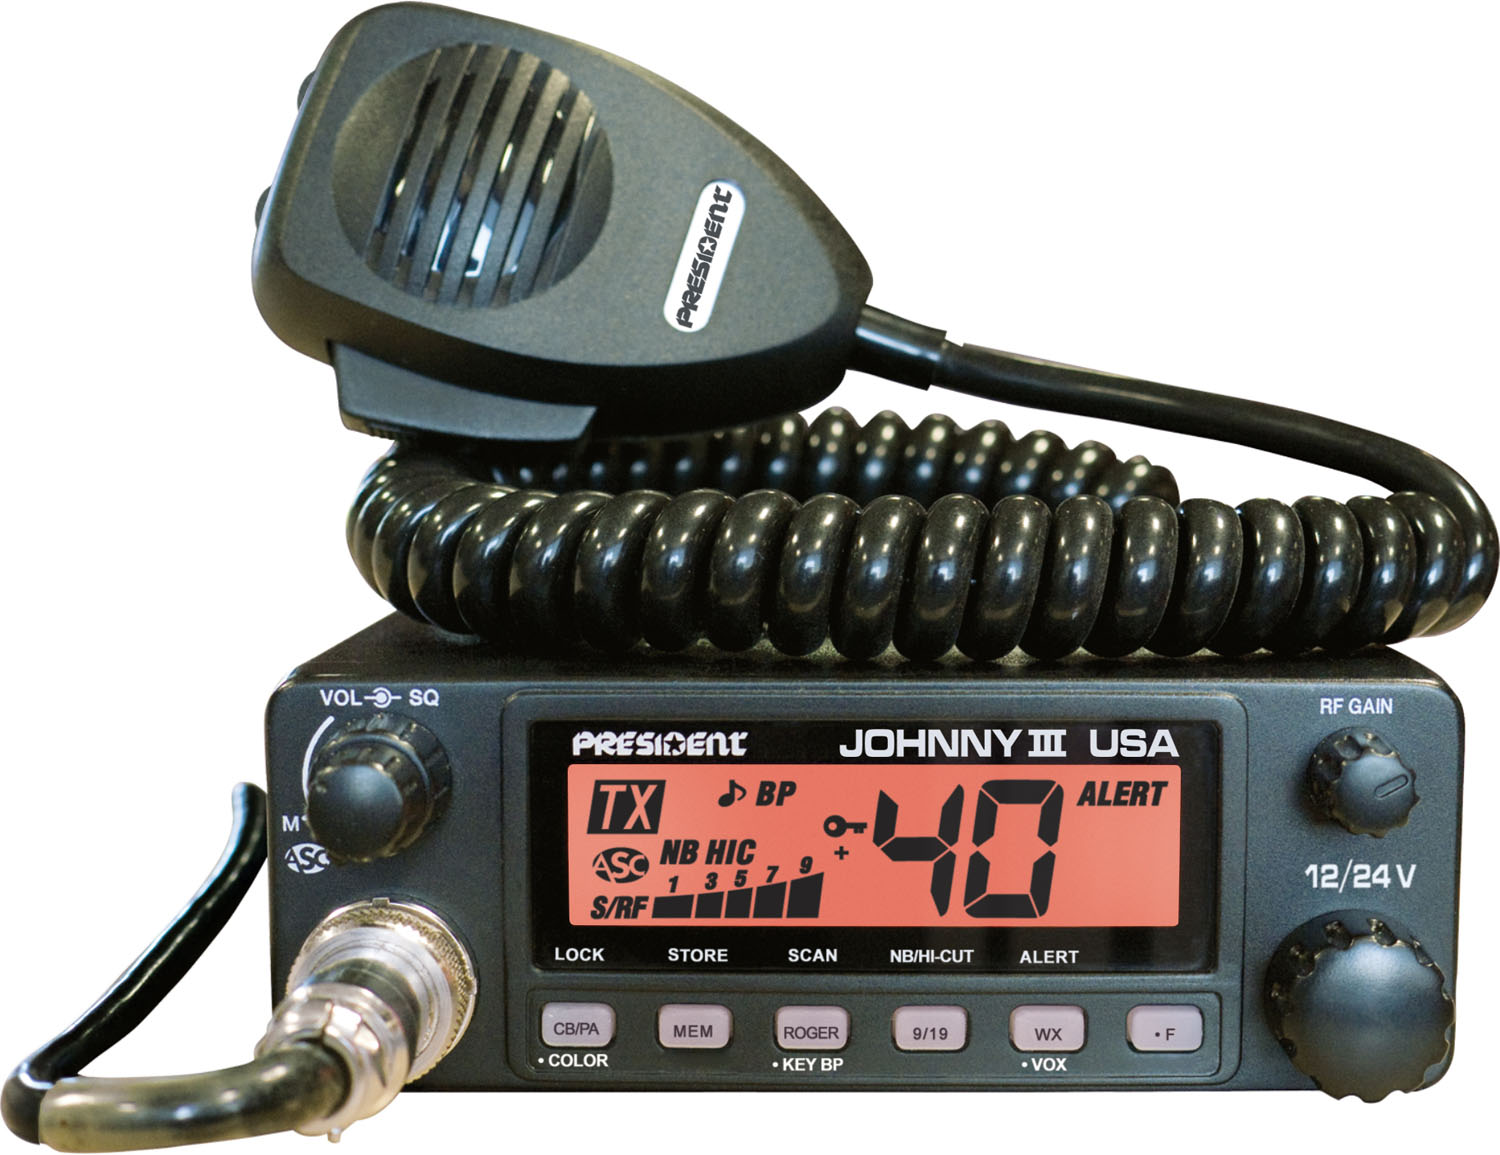 President - 12-24 Volt 40 Channel Mobile Cb Radio With Selectable 3 Color Front Panel, Vox, Weather, Rf Gain